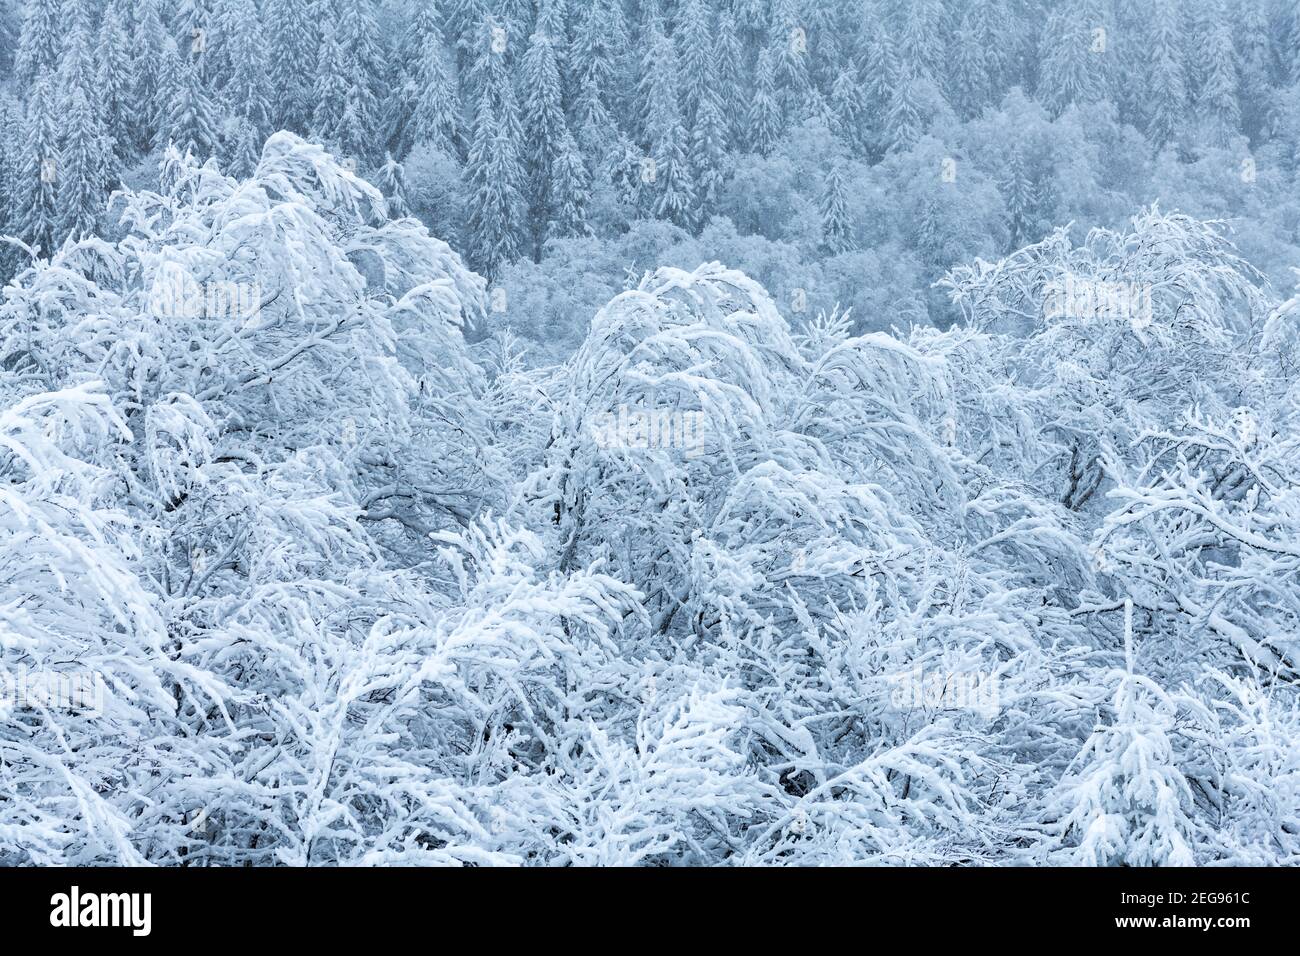 Winter forest covered by snow closeup. Landscape photography Stock Photo